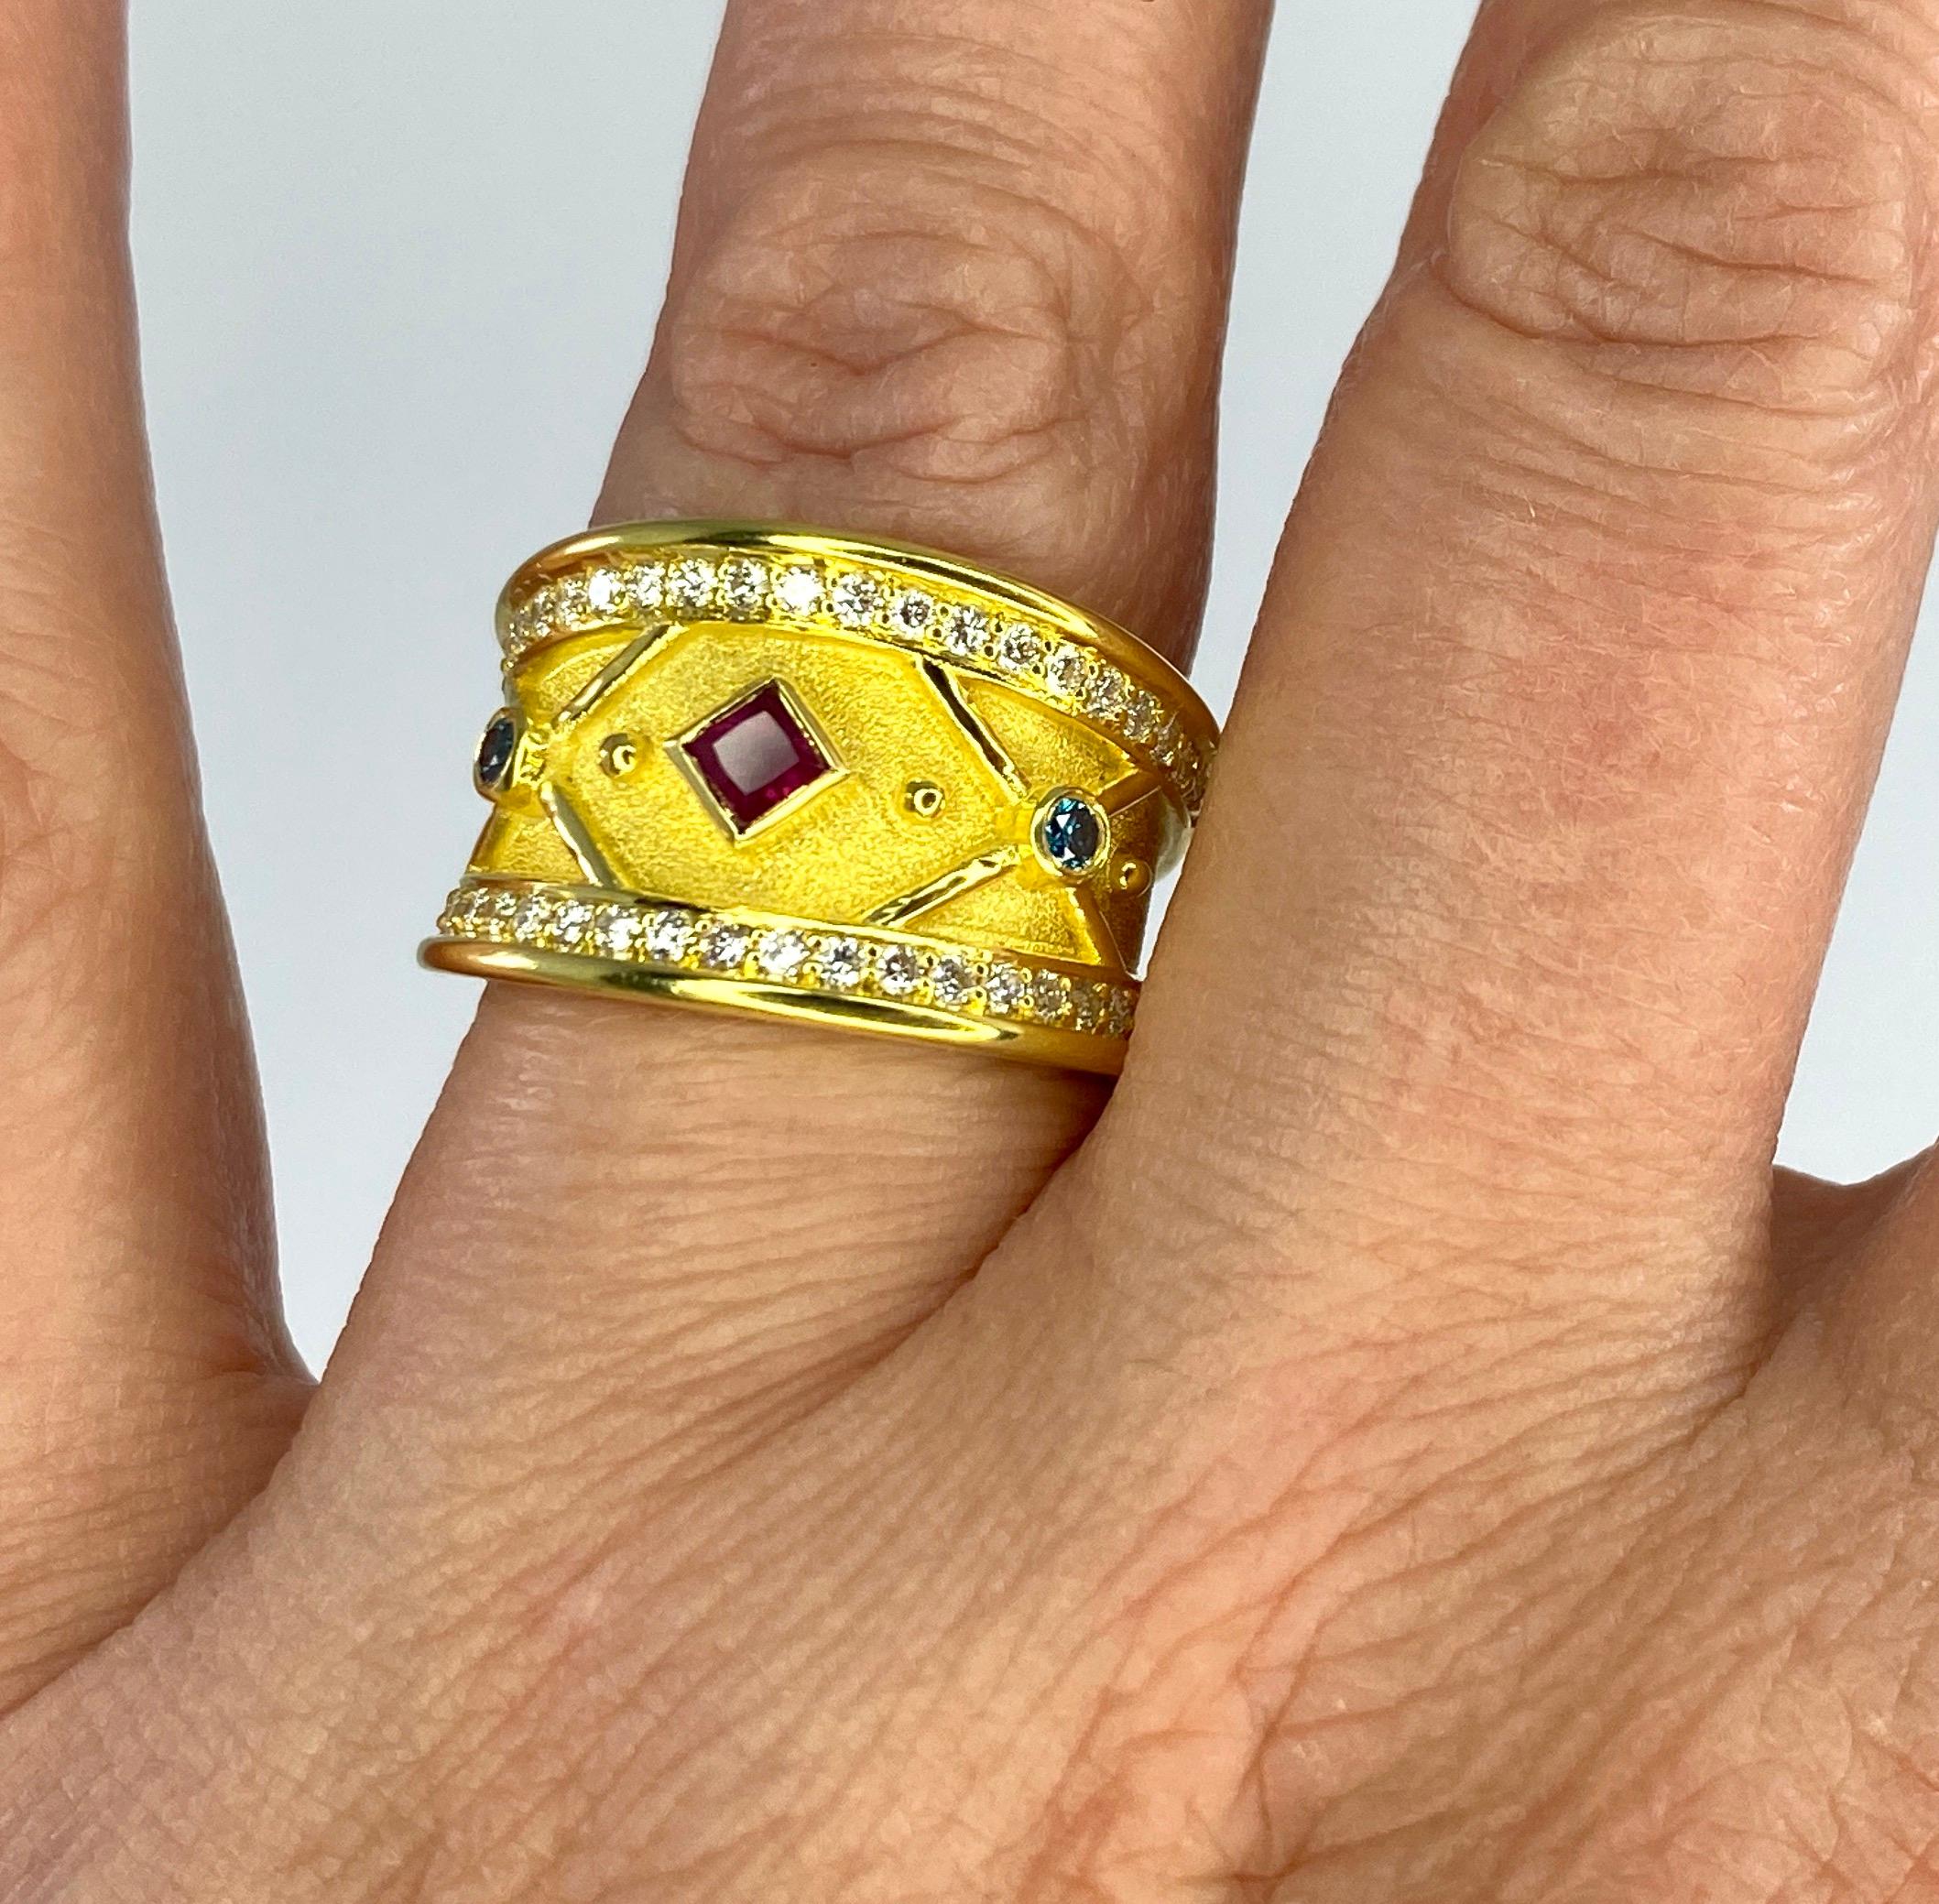 This elegant S.Georgios designer graduated ring is handmade from solid 18 Karat Yellow Gold. The ring is microscopically decorated with 18 Karat yellow gold beds and wires laid against the Byzantine velvet background. The ring features 0.26 Carat